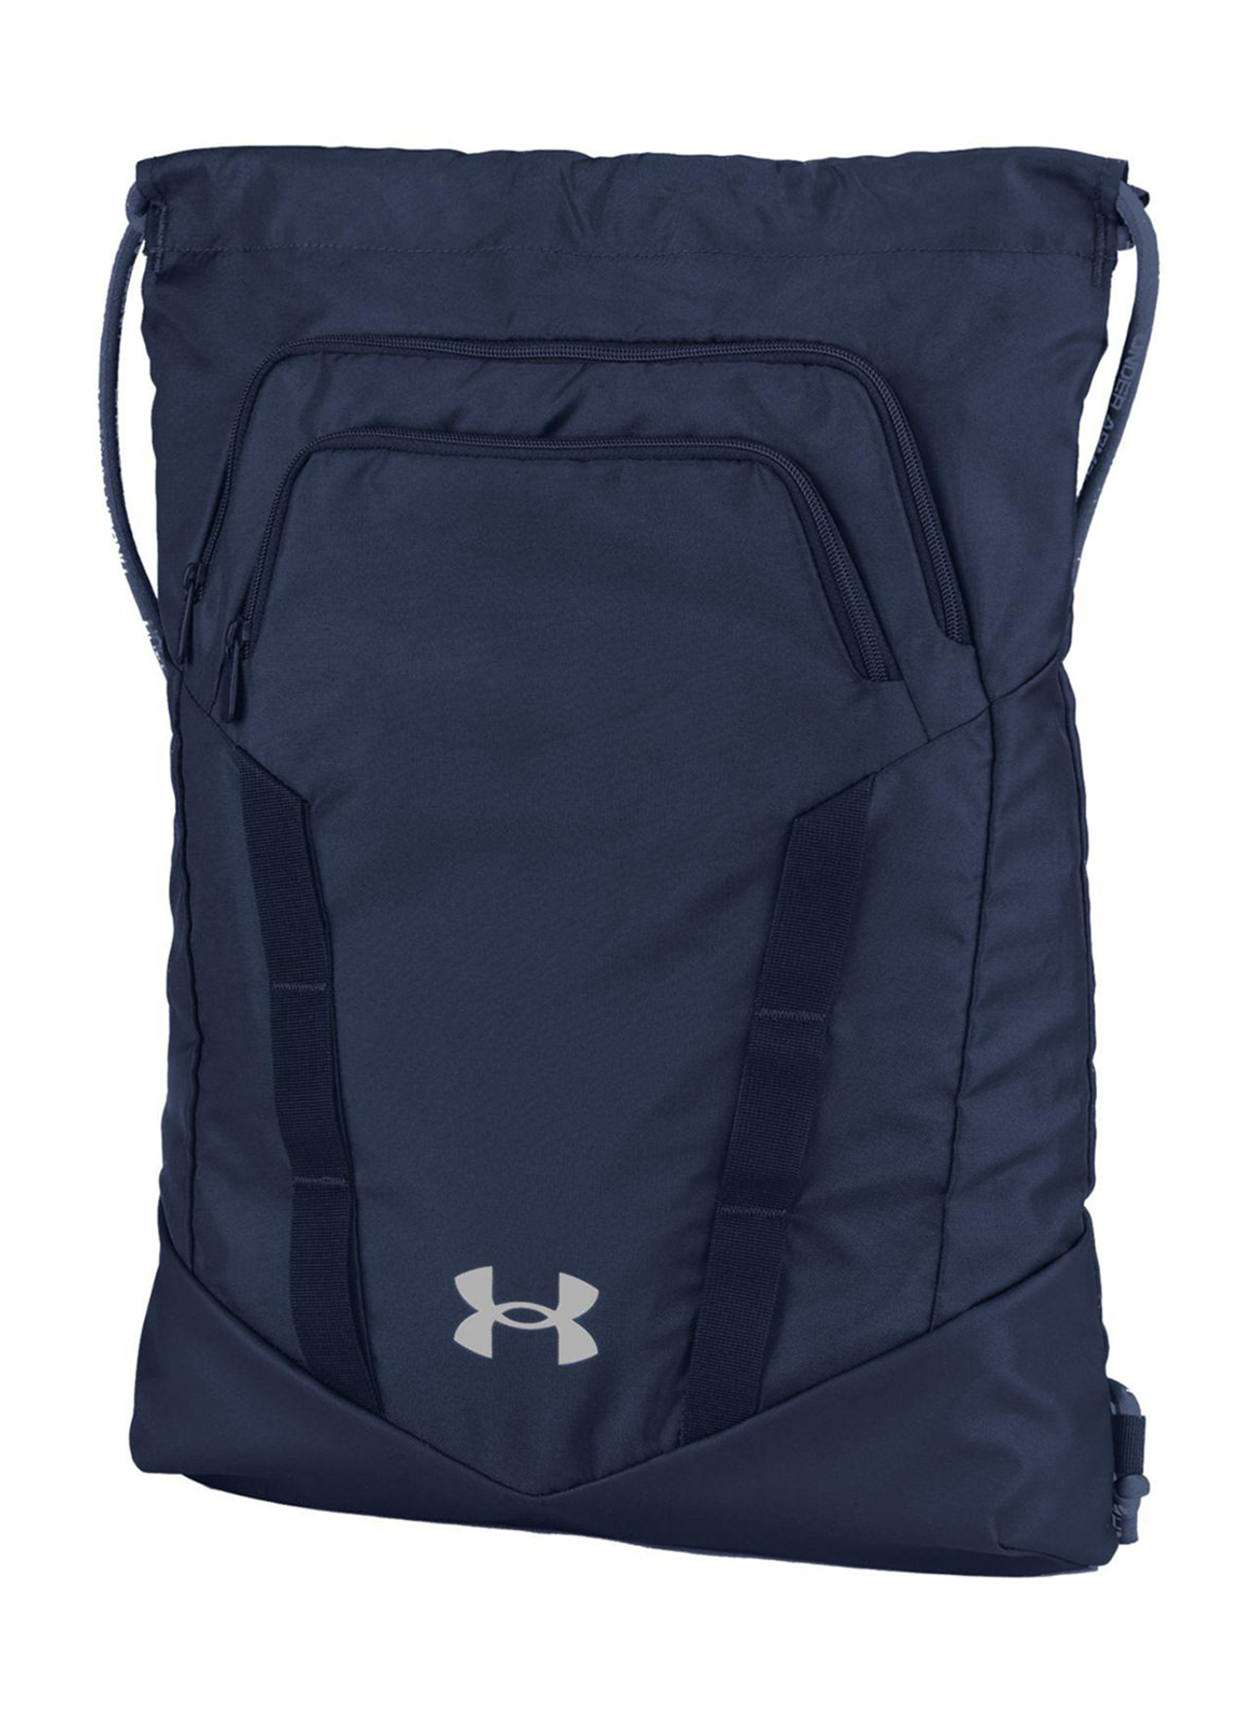 Under Armour Midnight Navy Undeniable Sackpack 2.0